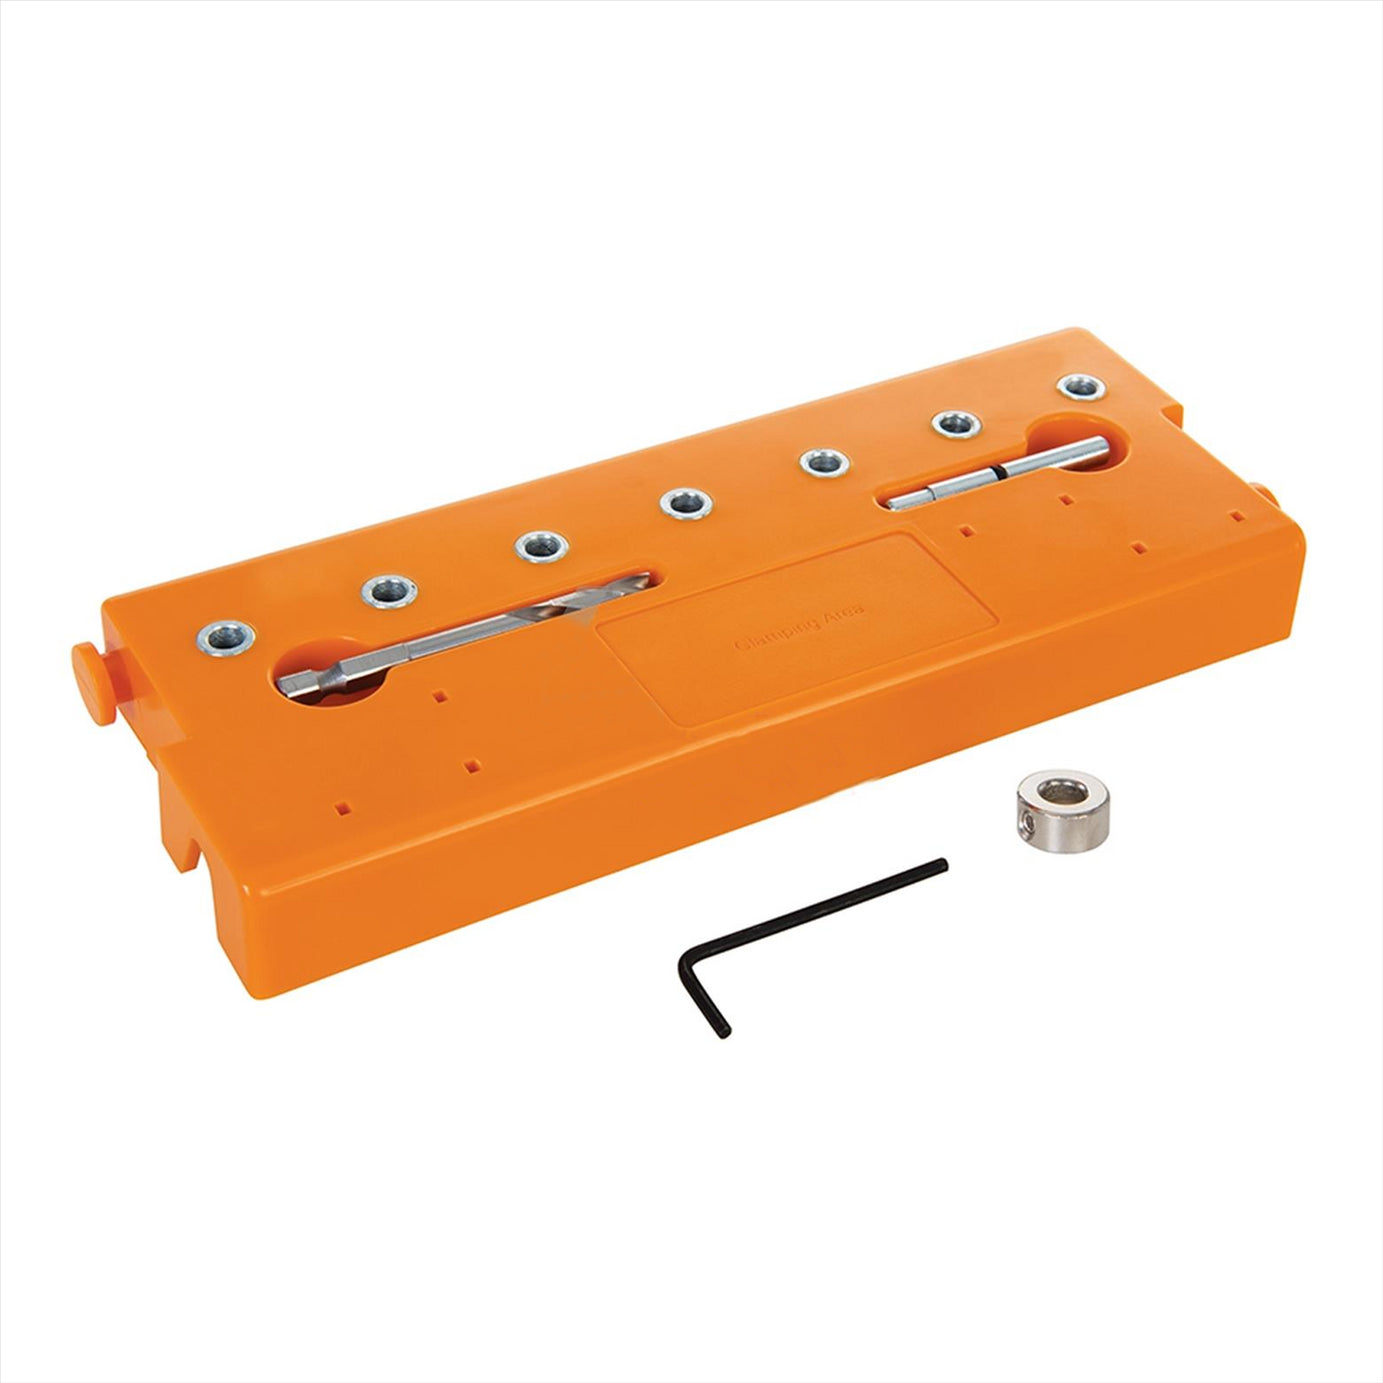 TS Shelf Pin Jig TSPJ Simple Slot-together System For Joining 2 Or More Jigs.